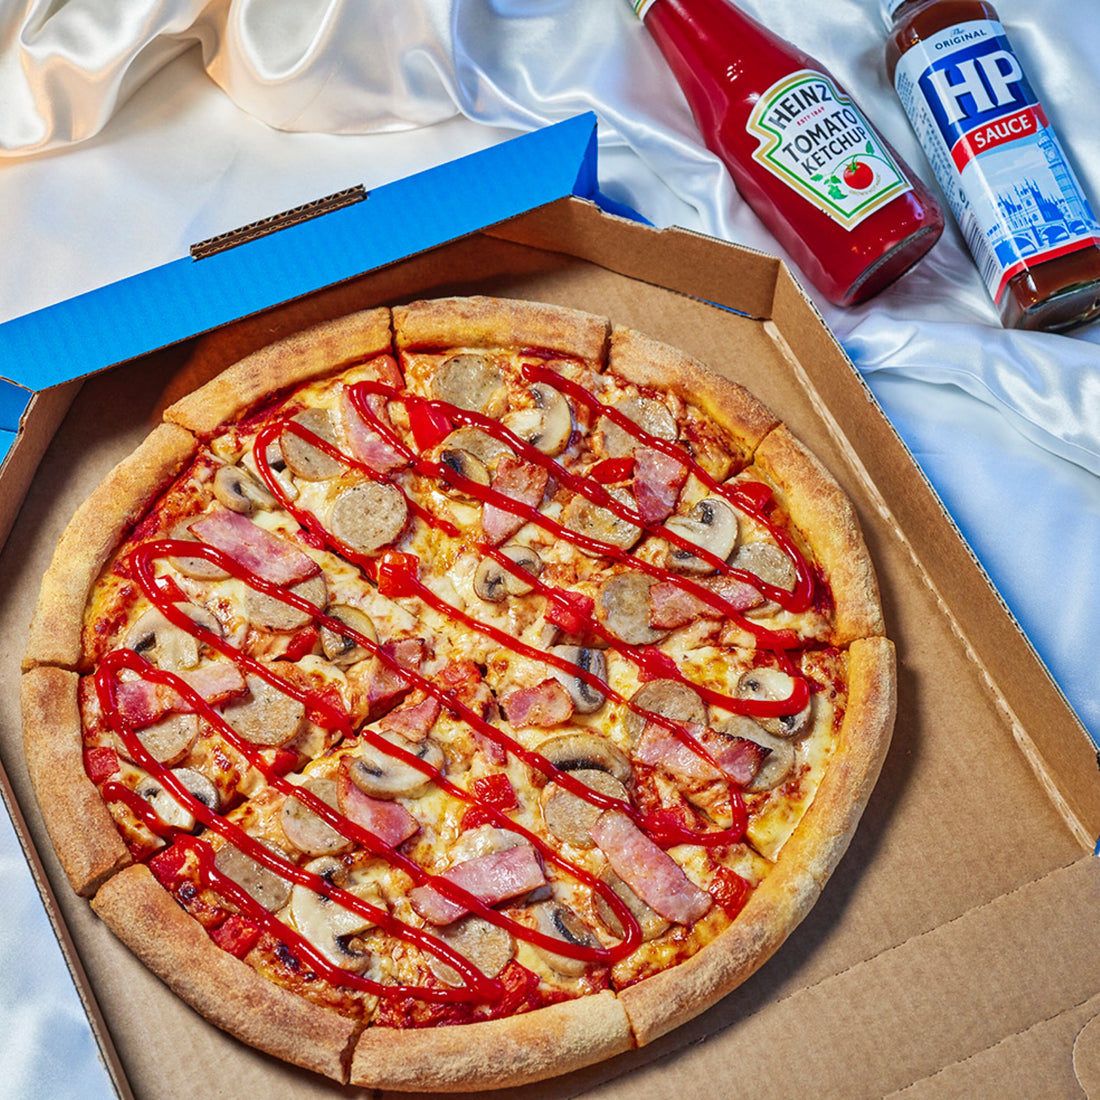 Domino’s want to know if you are team red or team brown?